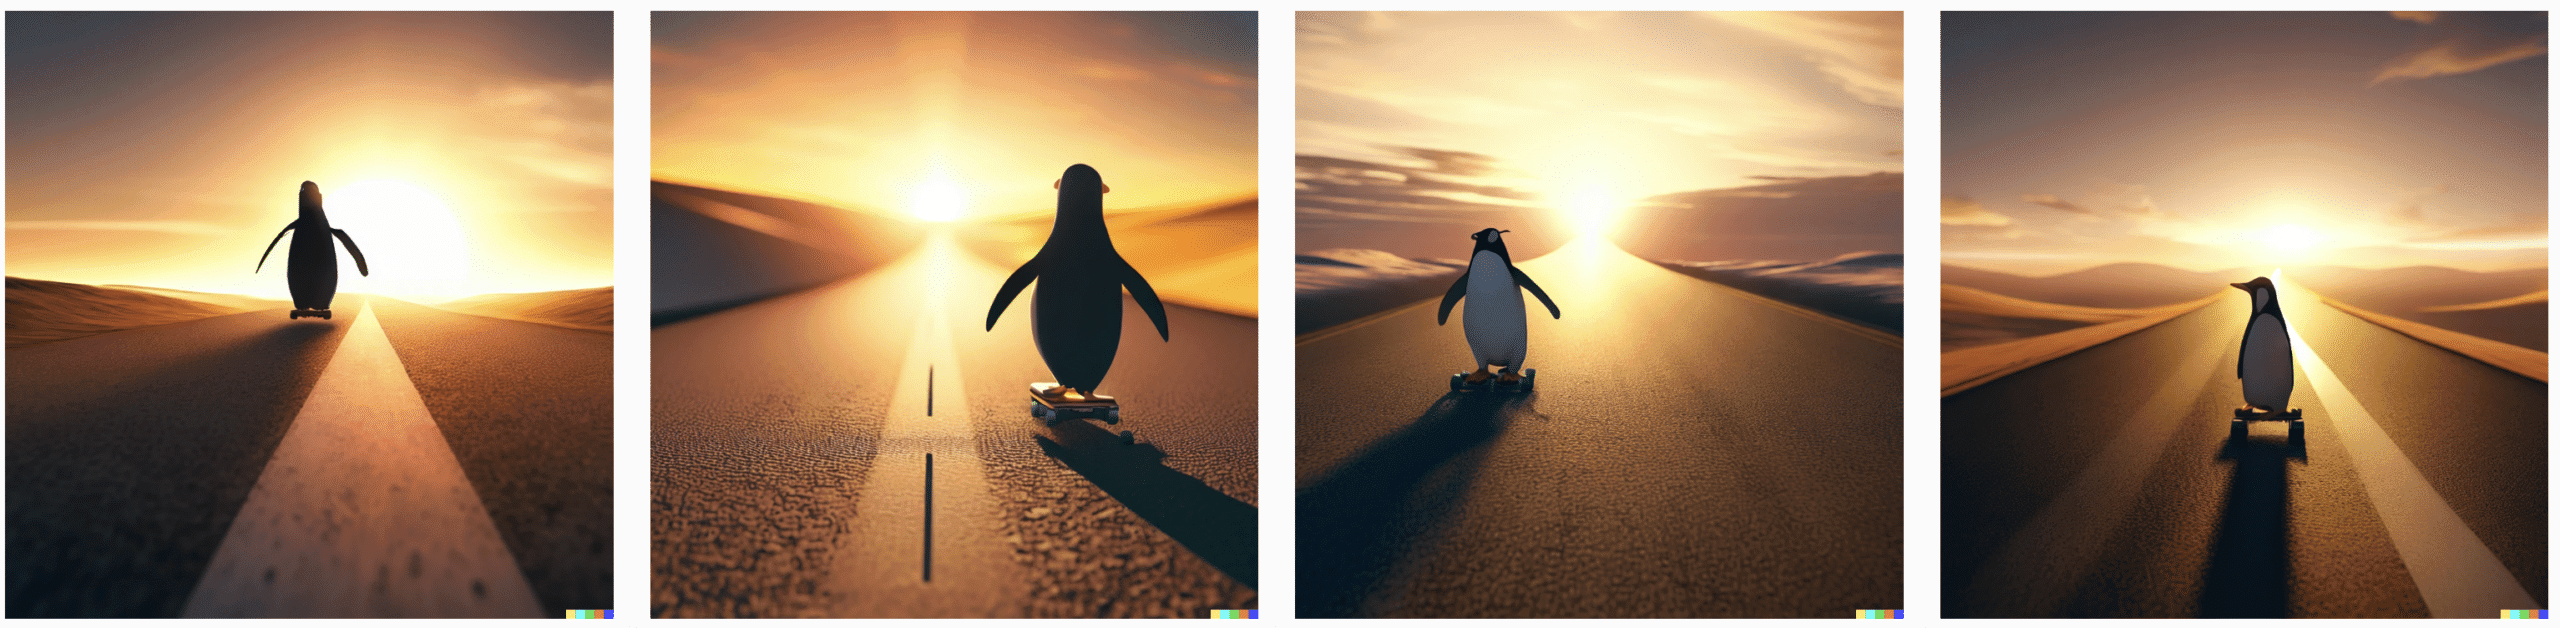 DALL-E 2 experimental update image of a penguin skateboarding into the sunset on a long path centered with a desert on both sides. photorealistic 8k